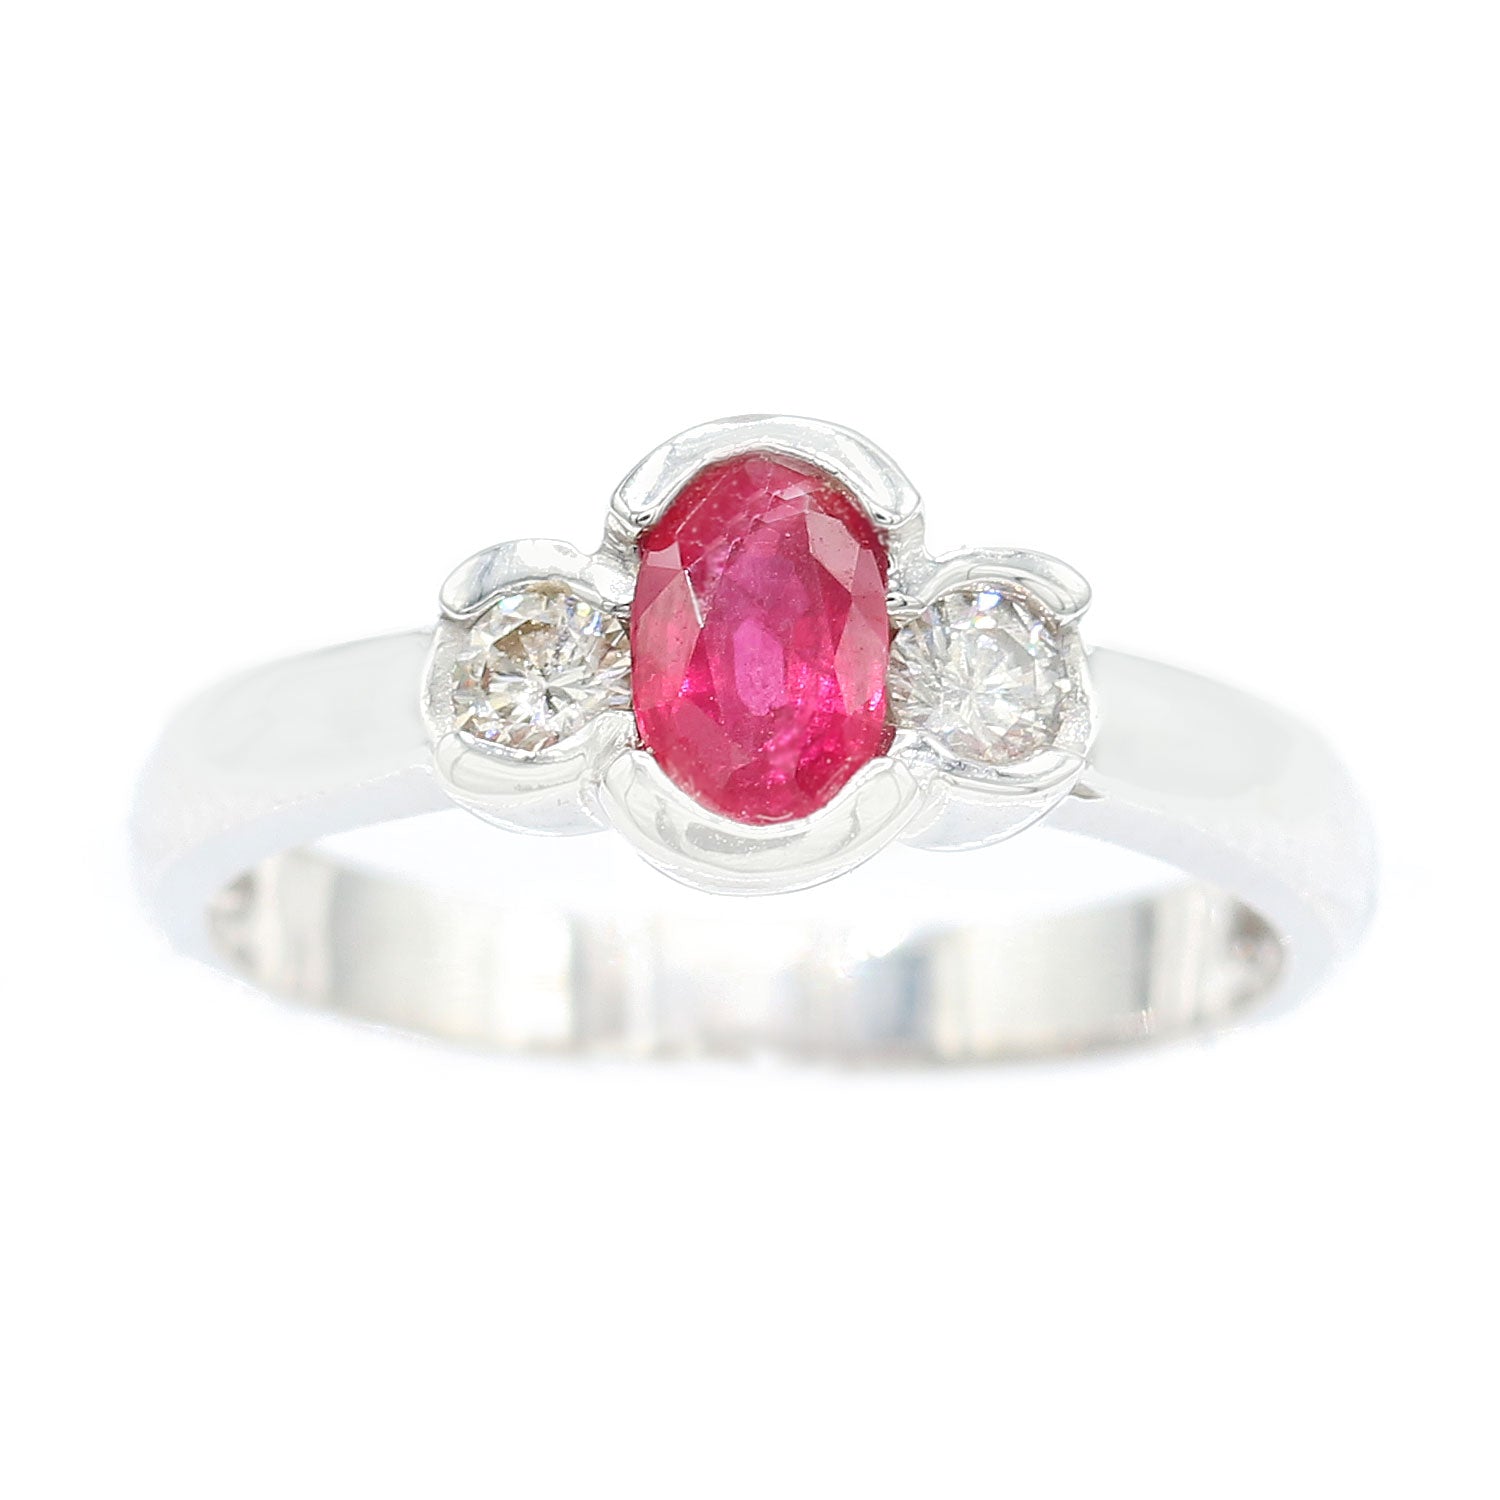 https://gevapps.com/products-importer/uploads/nh4305ruby.jpg